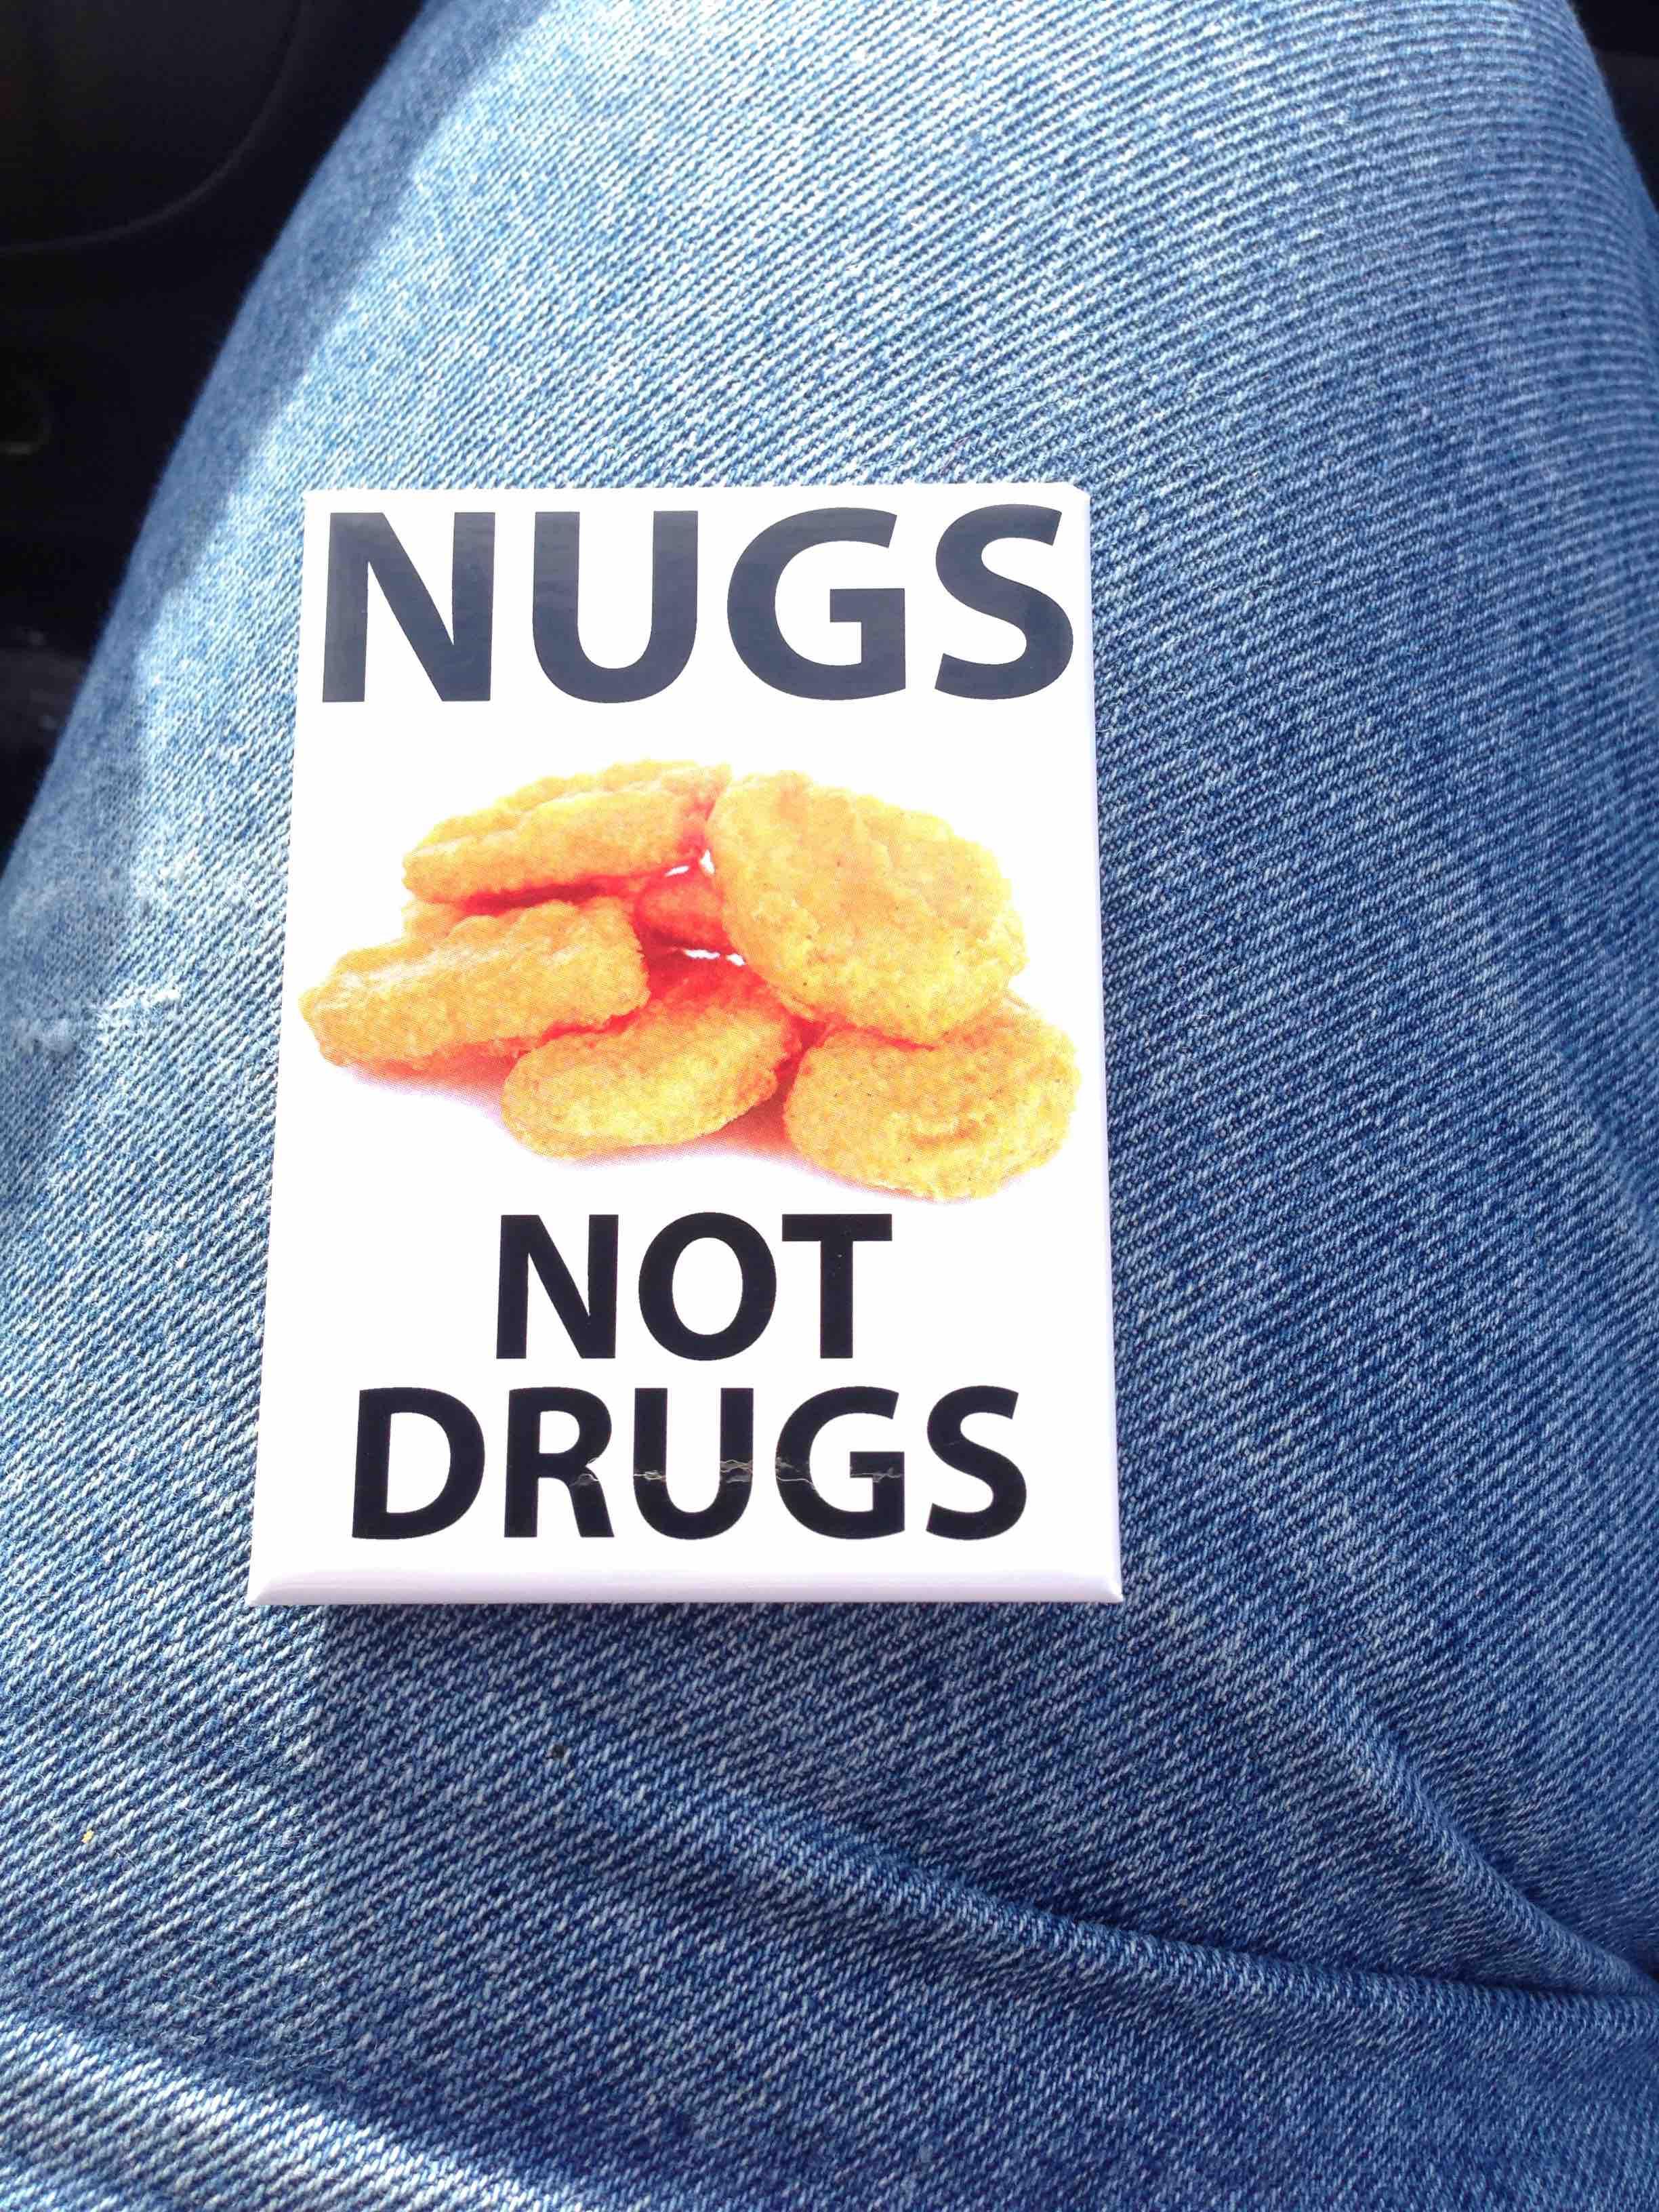 toys r not us - Nugs Not Drugs